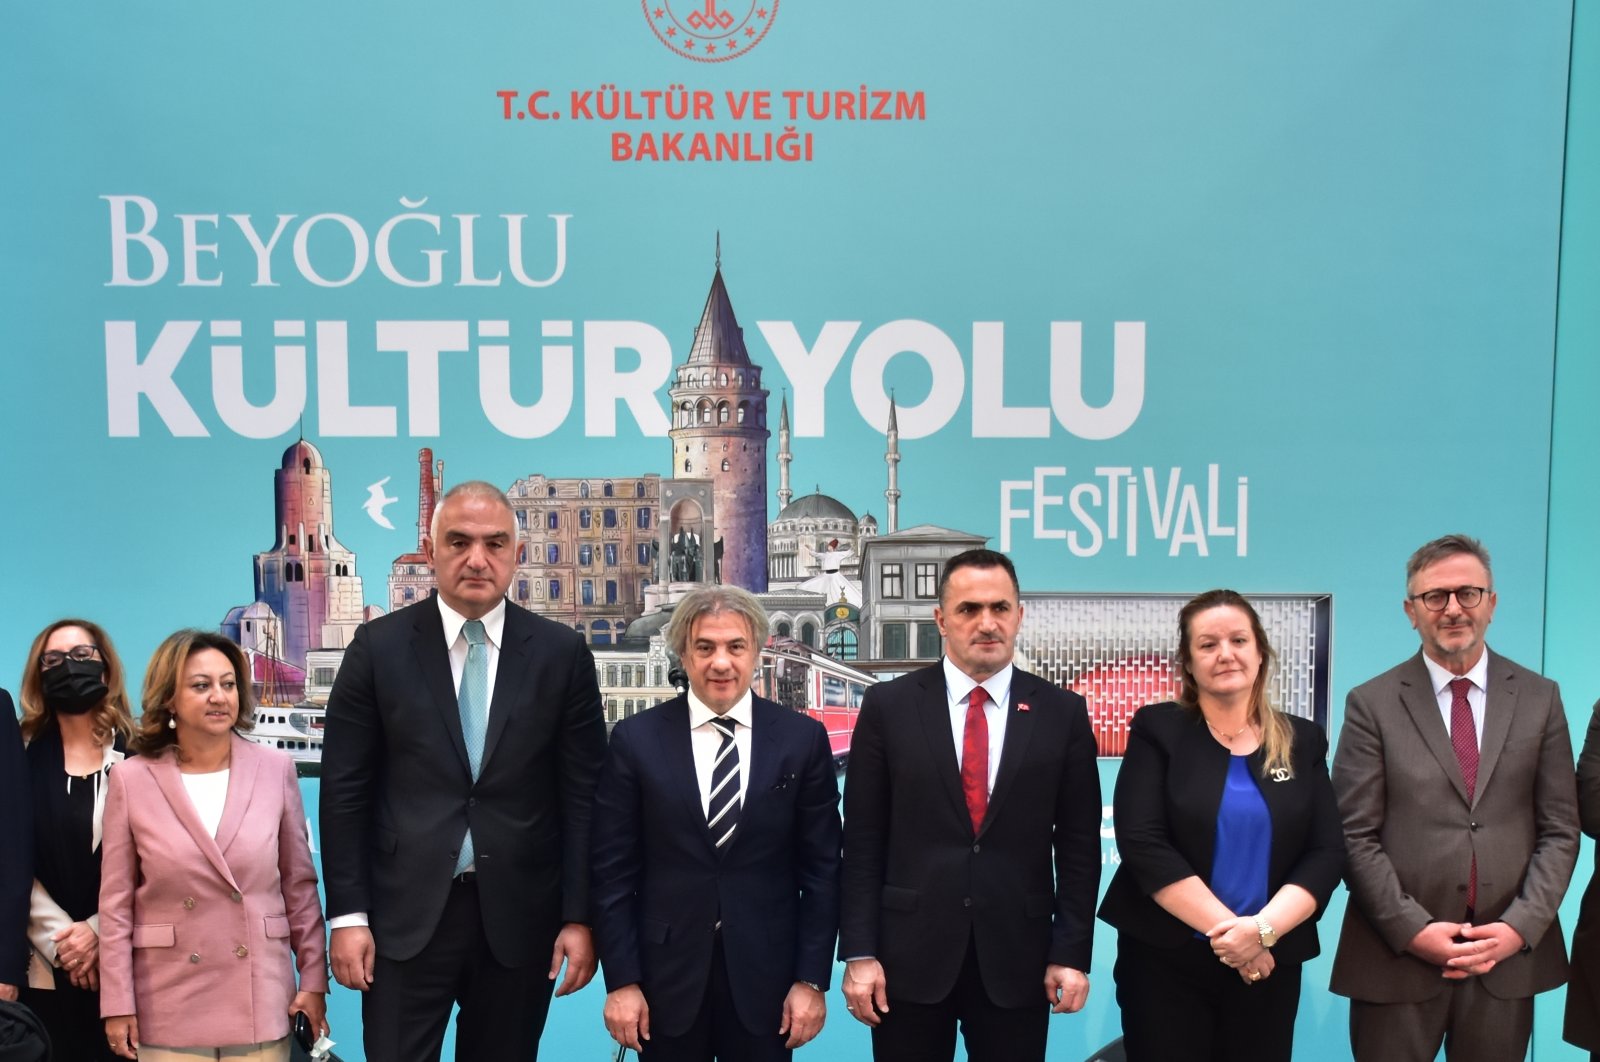 Culture and Tourism Minister Mehmet Nuri Ersoy (3rd L) is seen during the publicity event for the Beyoğlu Culture Road Festival alongside deputy ministers and other officials in Istanbul, Turkey, Oct. 22, 2021. (AA Photo)